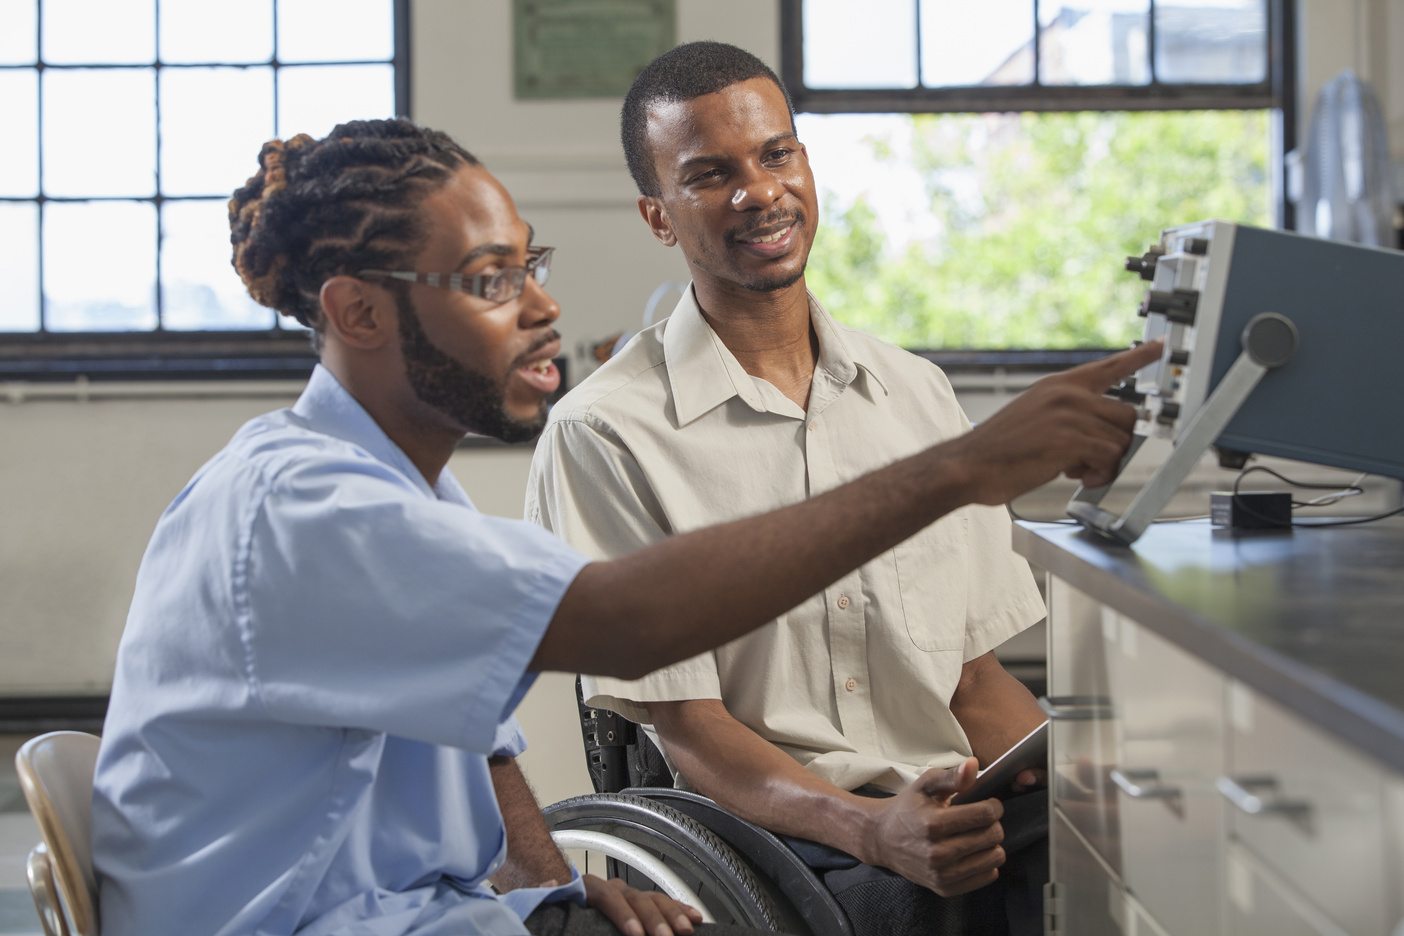 Two people, one with cornrows in their hair and a beard, and the other using a wheelchair, sit in a laboratory environment looking at a microscope, with a window open in the background.